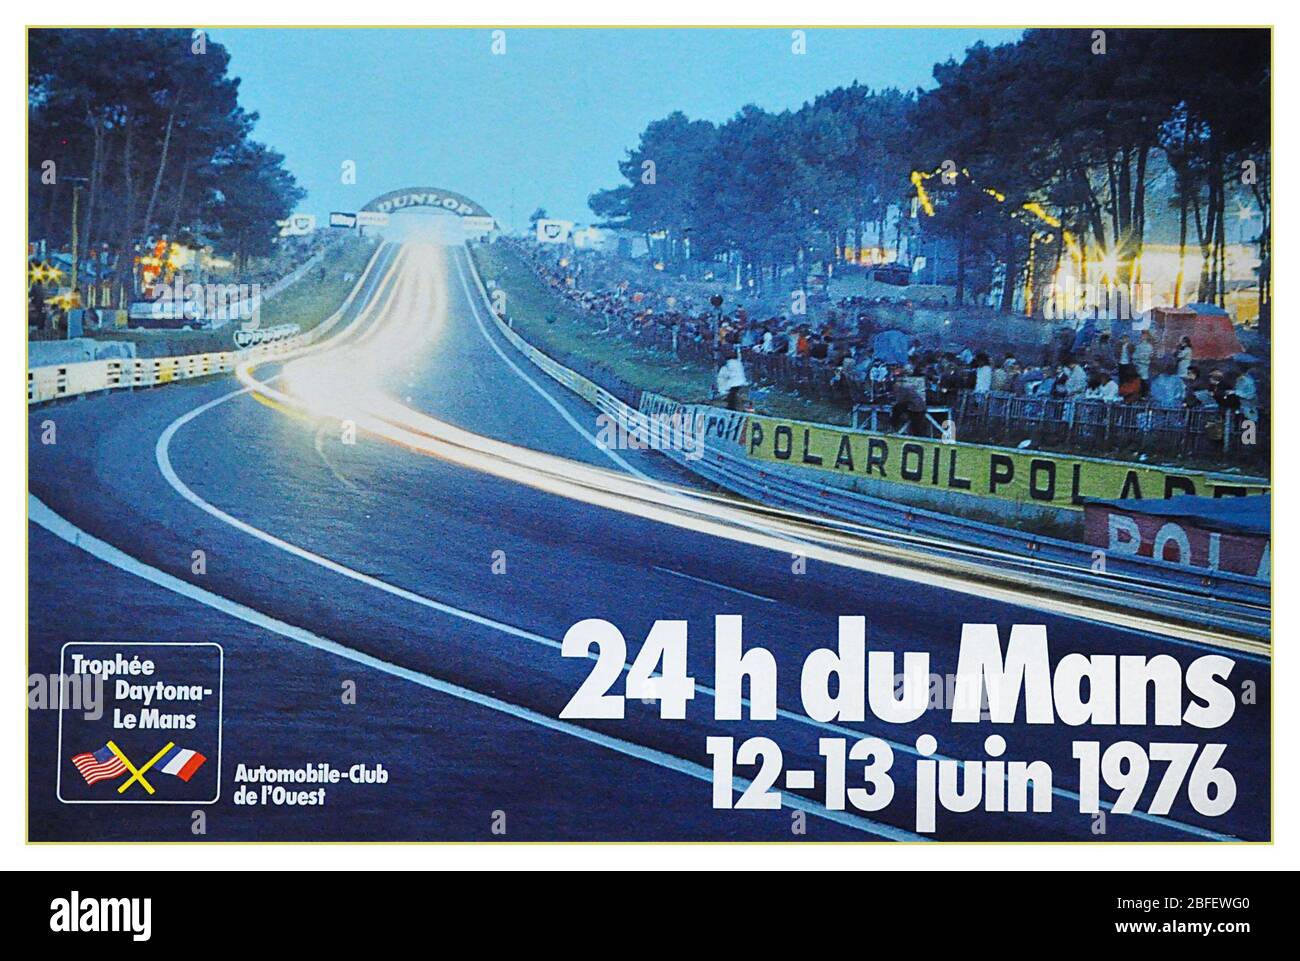 Vintage Motor Racing Poster 24 Hrs du Mans 12-13 June 1976 Le Mans France Motor race endurance 24 hours Promotion Advertising Poster Winner Jacky Ickx /Gijs van Lennep Martini Porsche Racing The 1976 24 Hours of Le Mans was the 44th Grand Prix of Endurance, and took place on 12 and 13 June 1976. Stock Photo